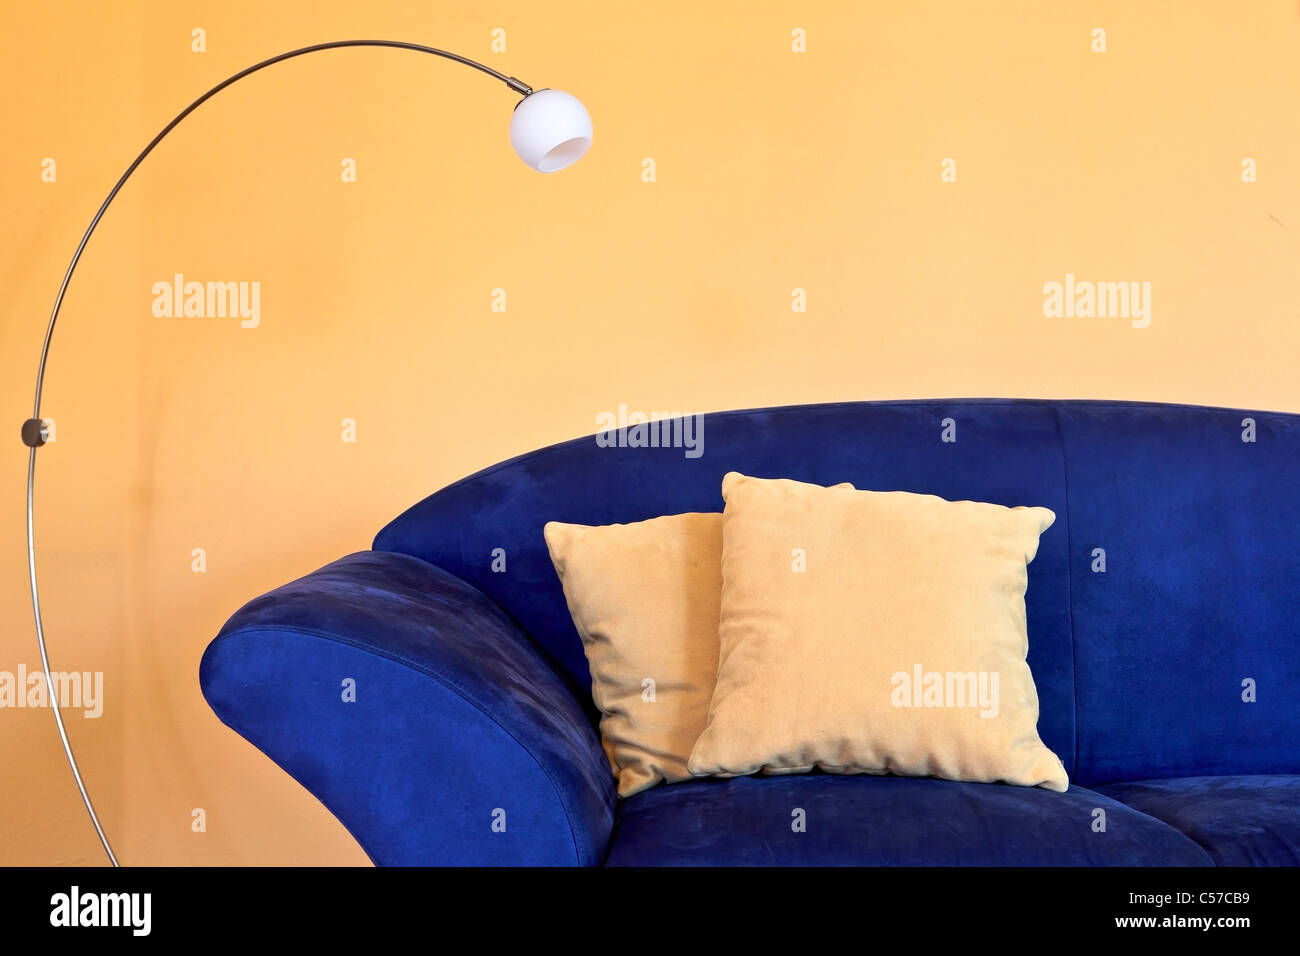 https://c8.alamy.com/comp/C57CB9/a-blue-sofa-with-reading-lamp-and-yellow-pillows-and-walls-C57CB9.jpg